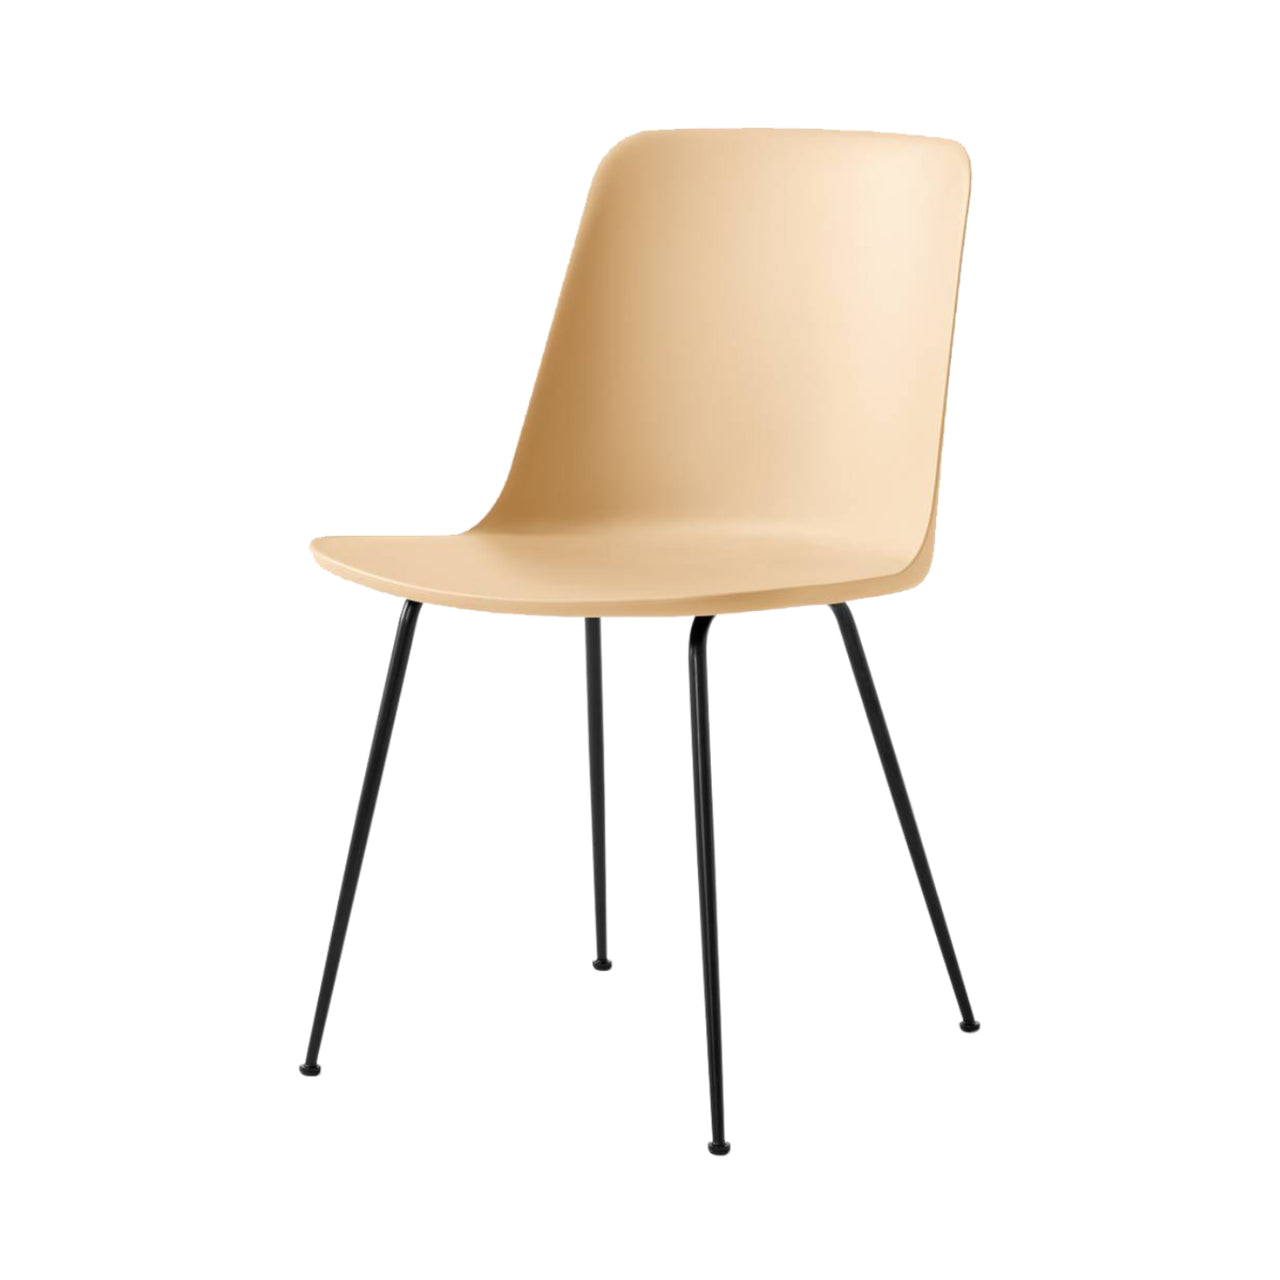 Rely Chair HW6: Beige Sand + Black